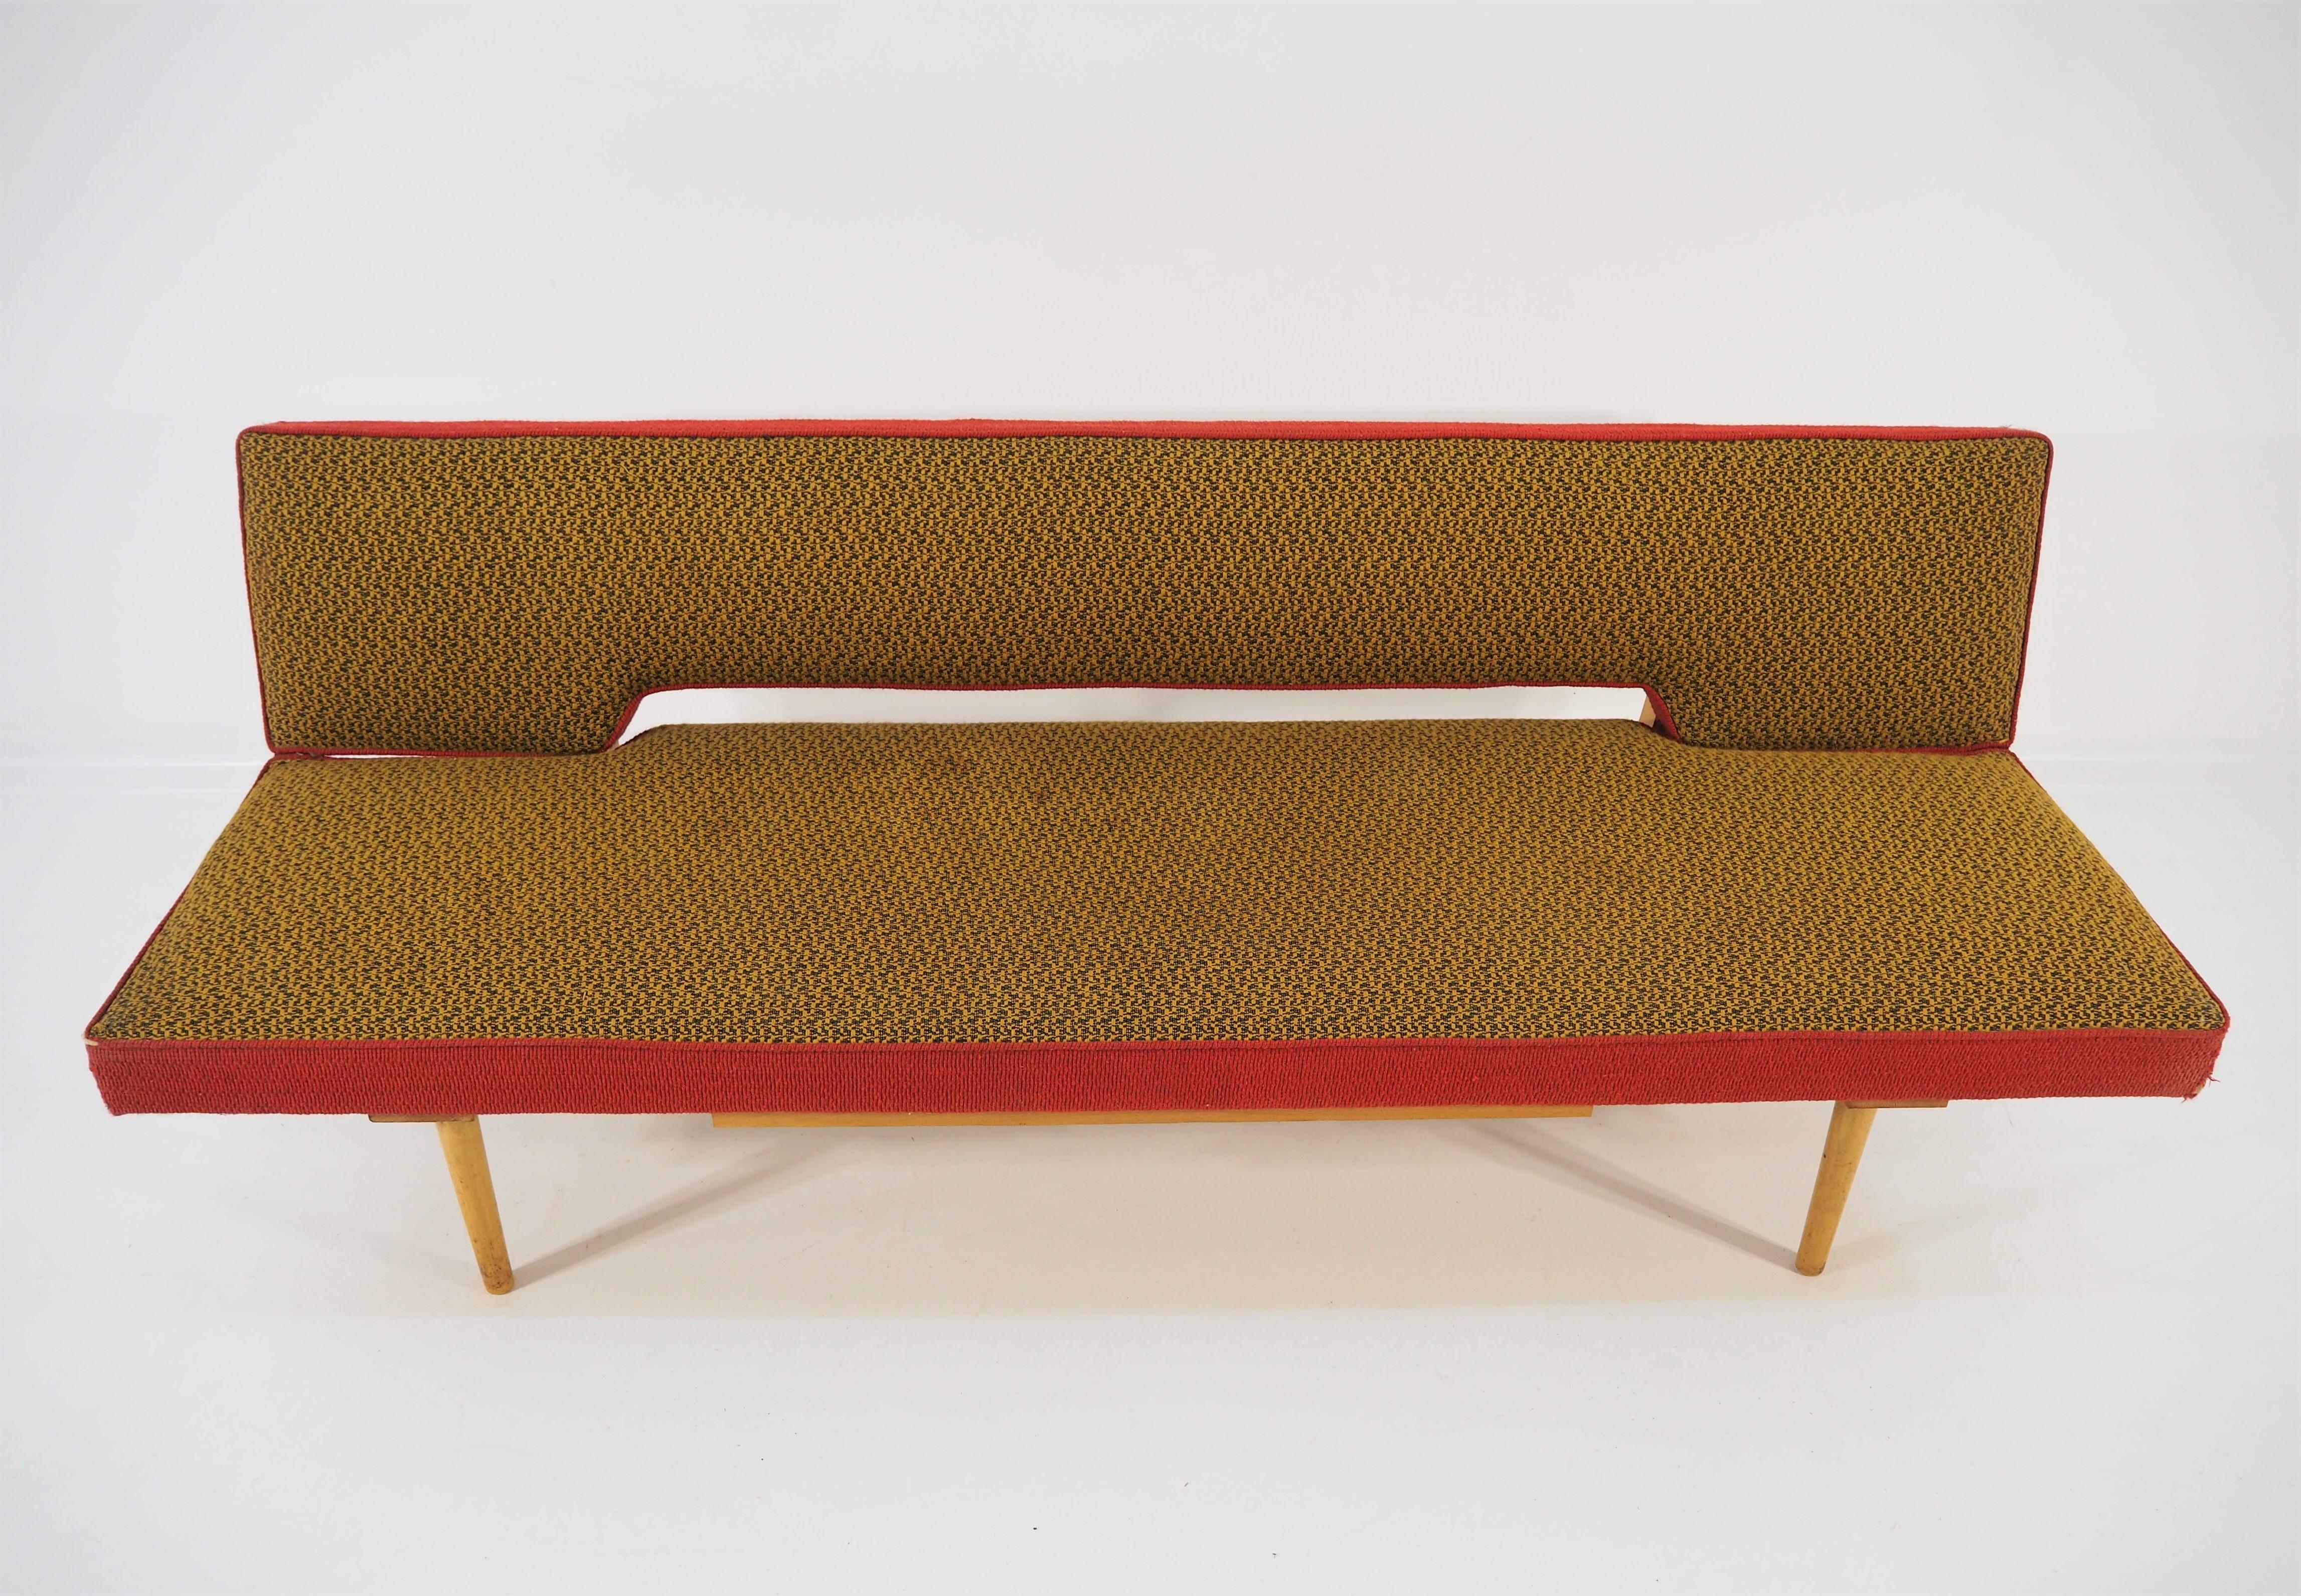 Daybed sofa by Miroslav Navratil, 1980s. Original condition with label. Upholstery to be replaced.